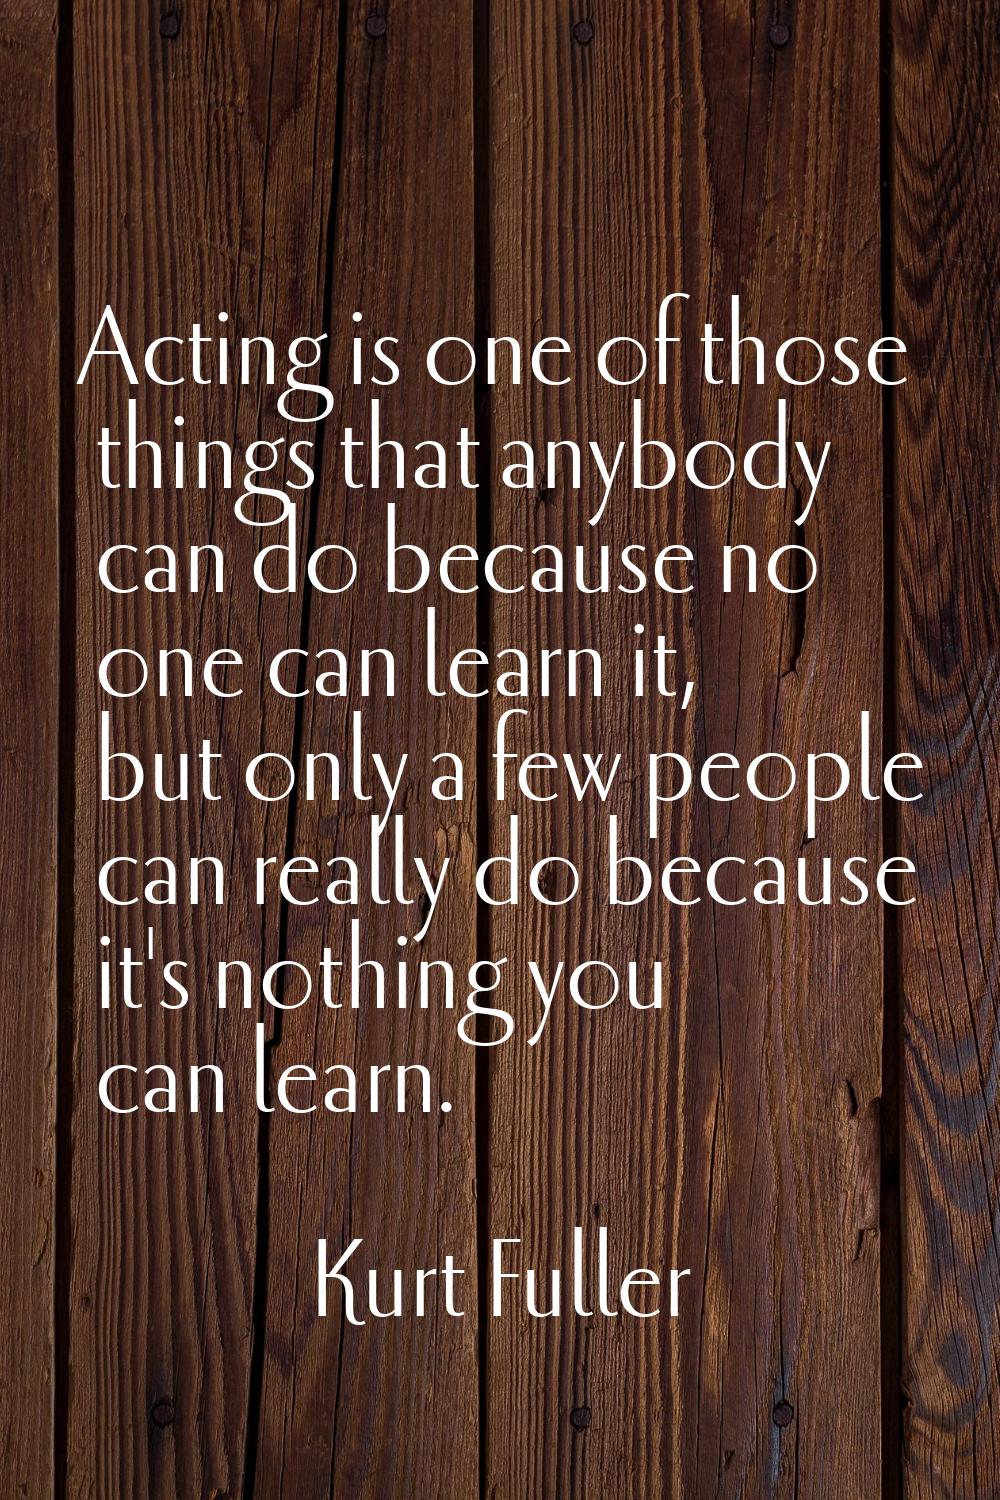 Acting is one of those things that anybody can do because no one can learn it, but only a few peopl